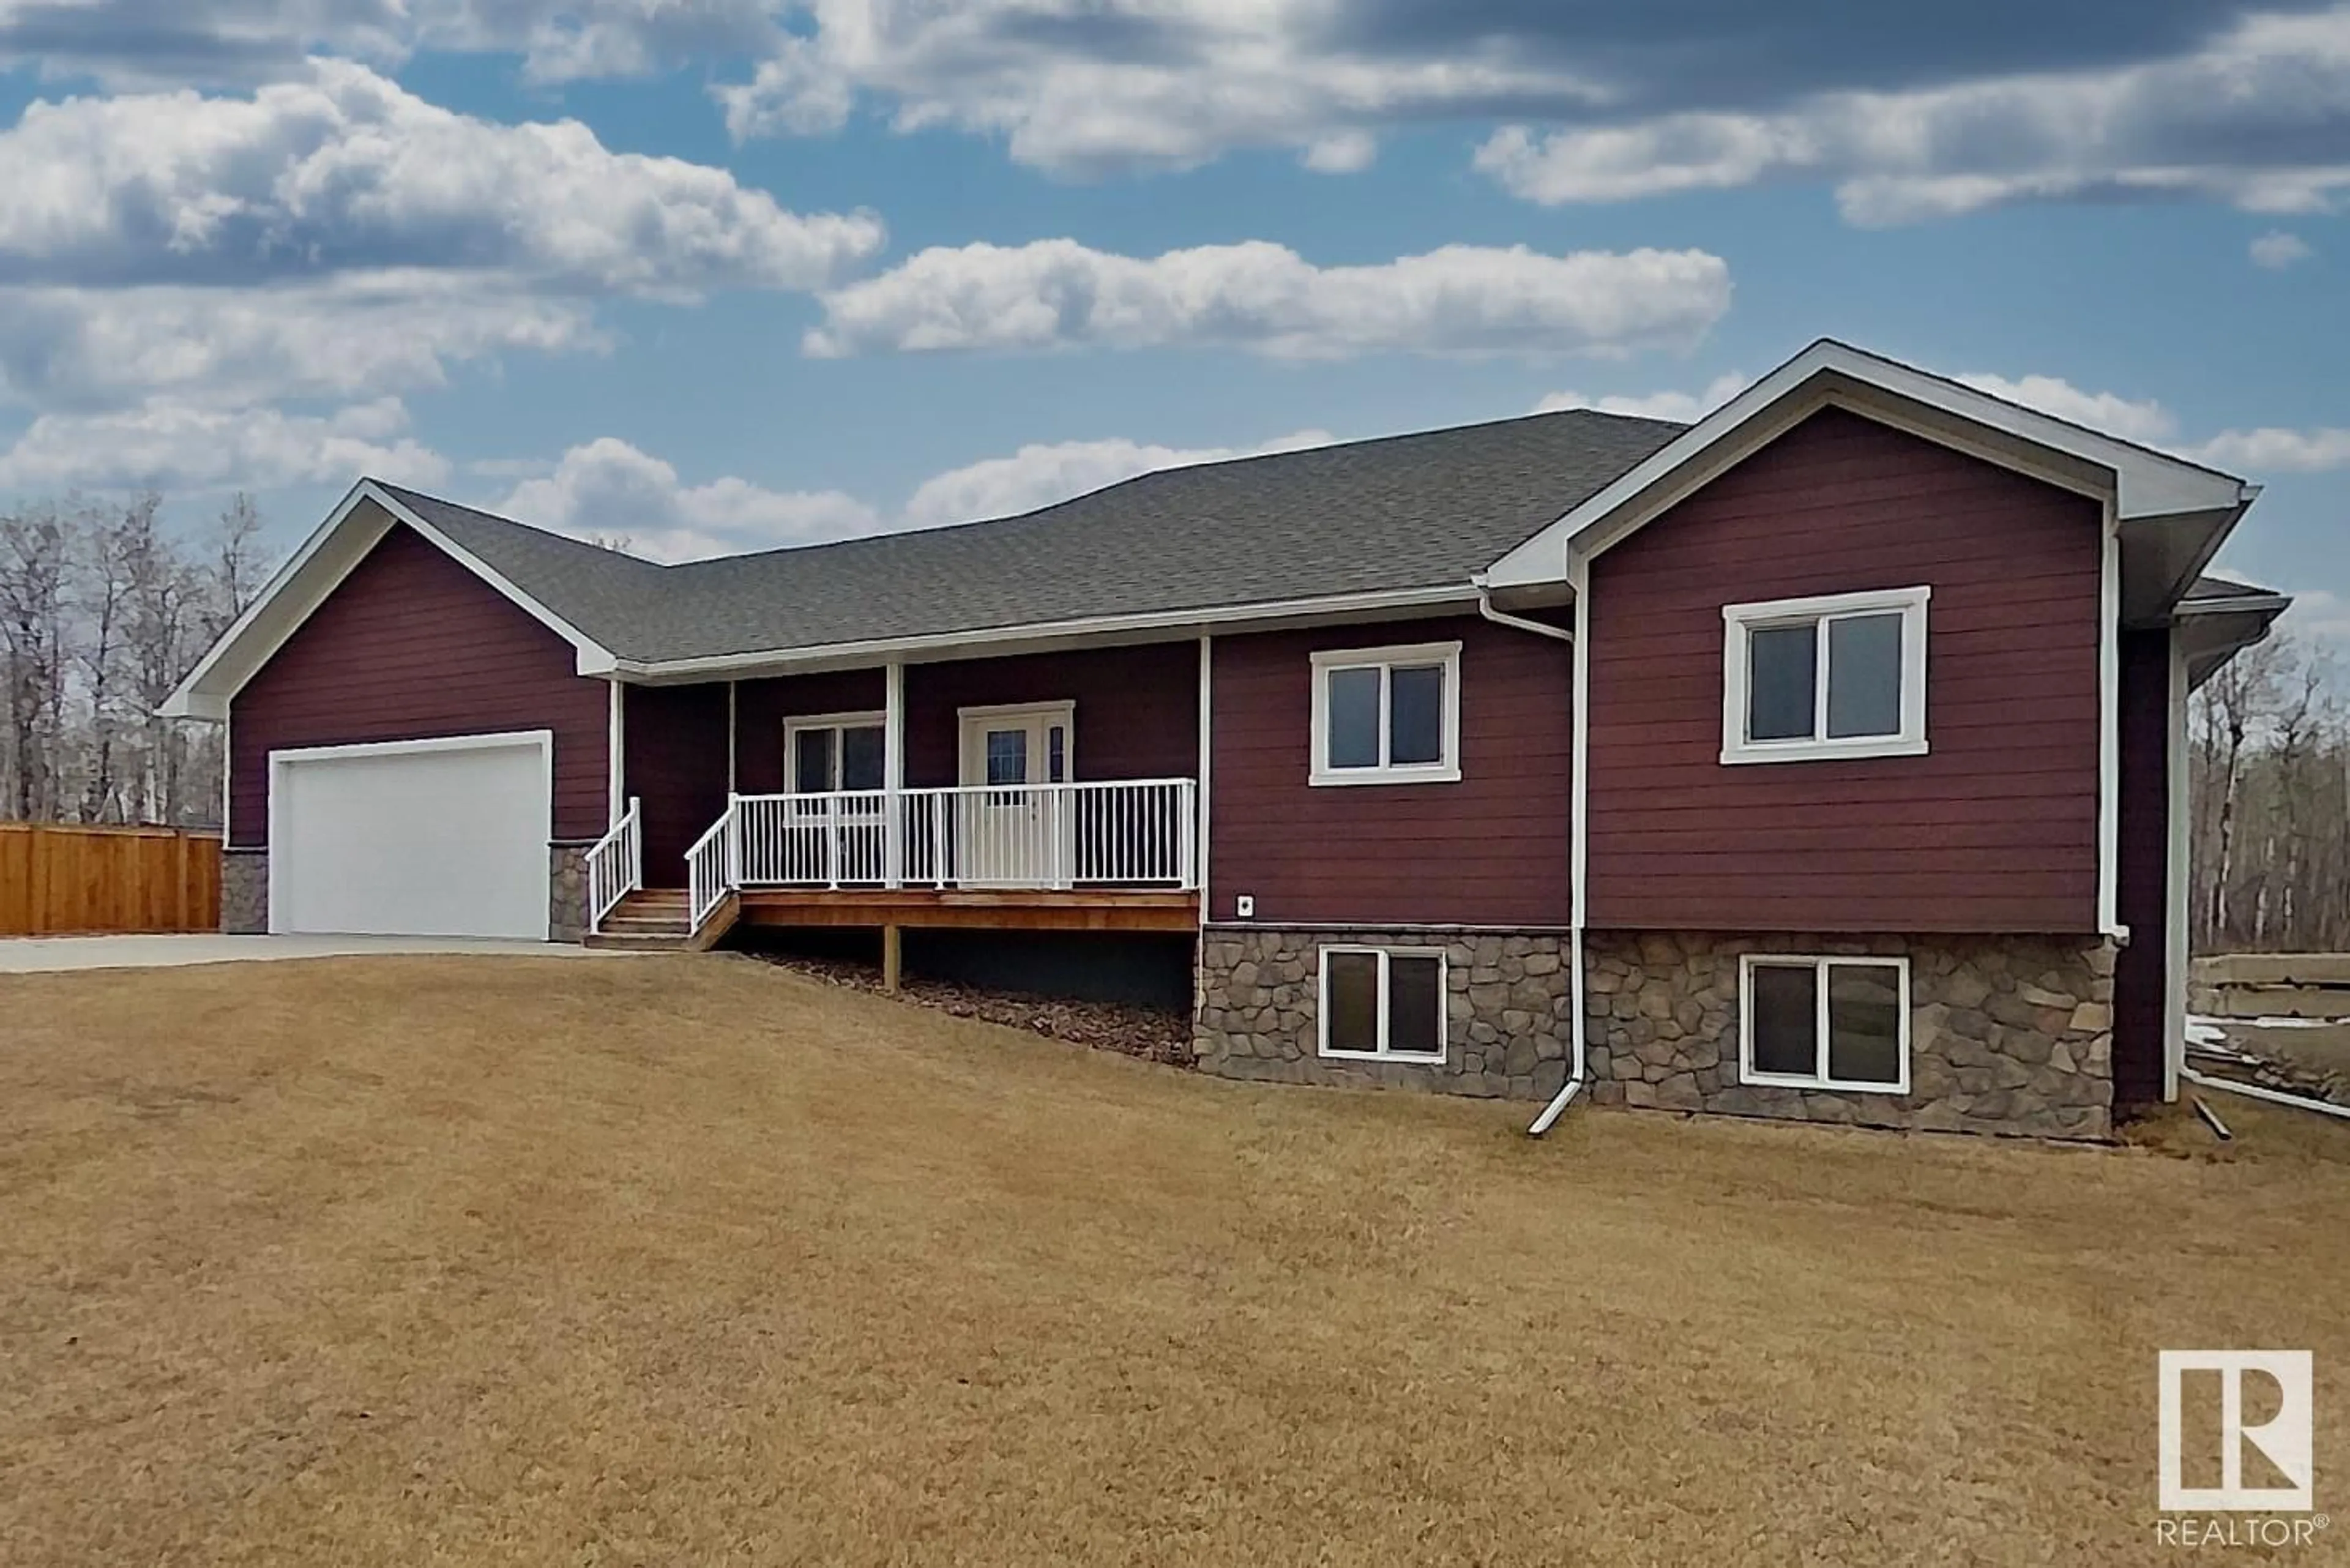 Frontside or backside of a home for #404 Duncan RD, Rural Barrhead County Alberta T0E1A0